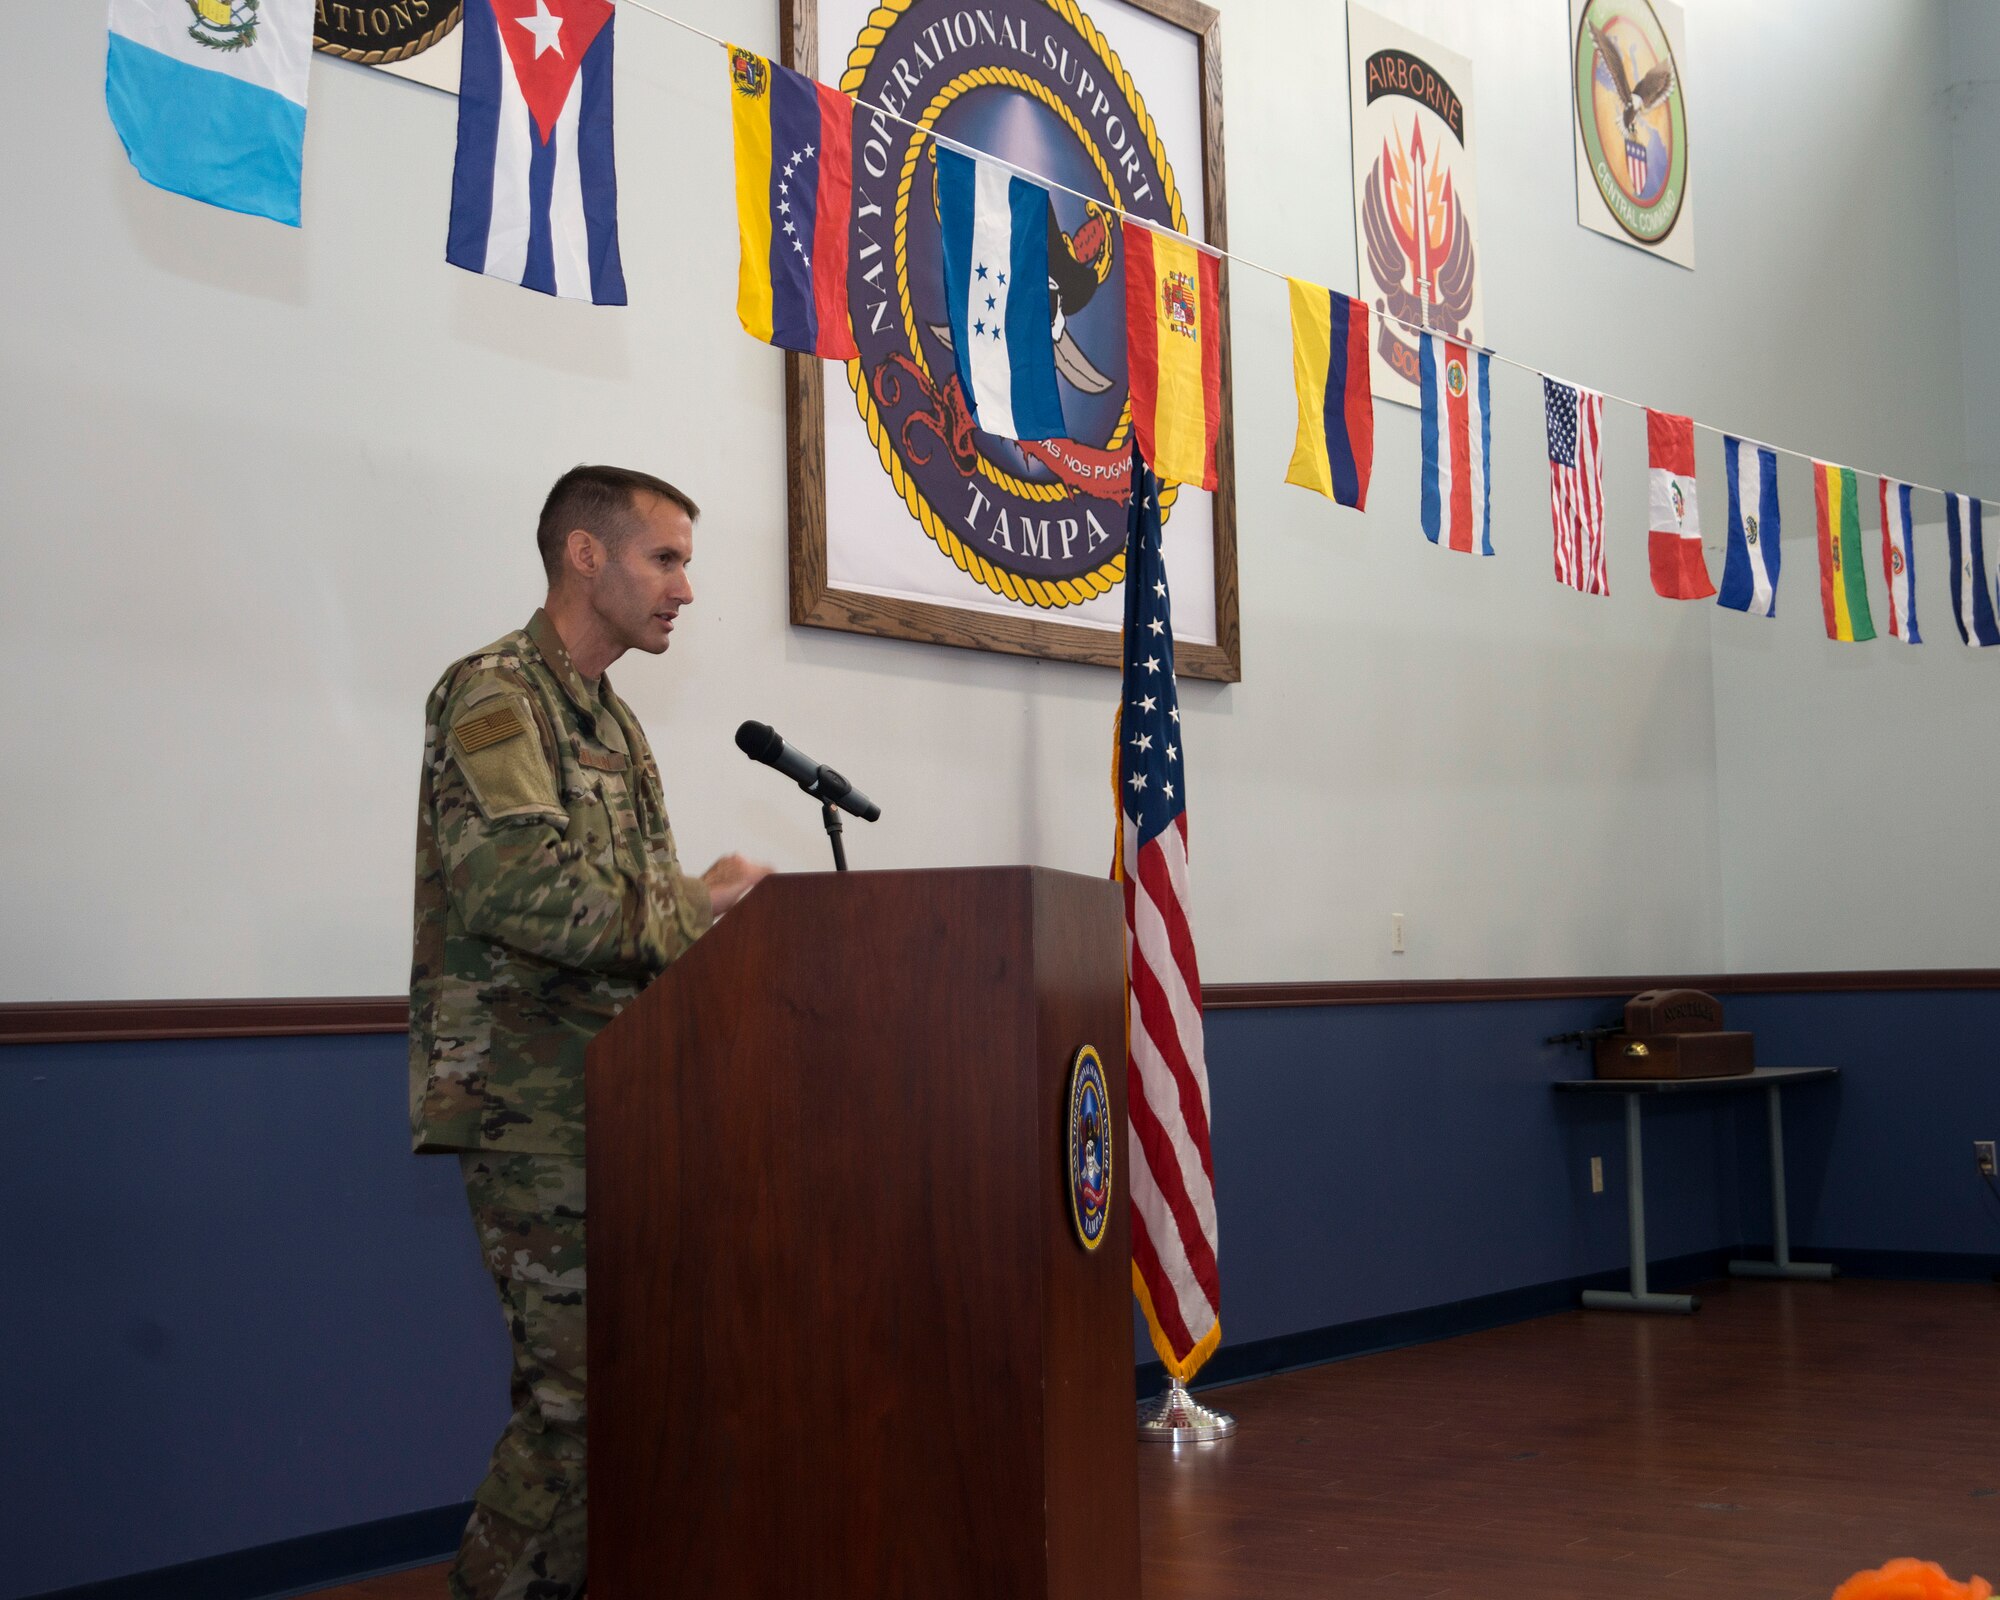 U.S. Air Force Col. Stephen Snelson, the 6th Air Mobility Wing Commander, speaks at the National Hispanic Heritage month luncheon at MacDill Air Force Base, Fla., Oct. 11, 2018.